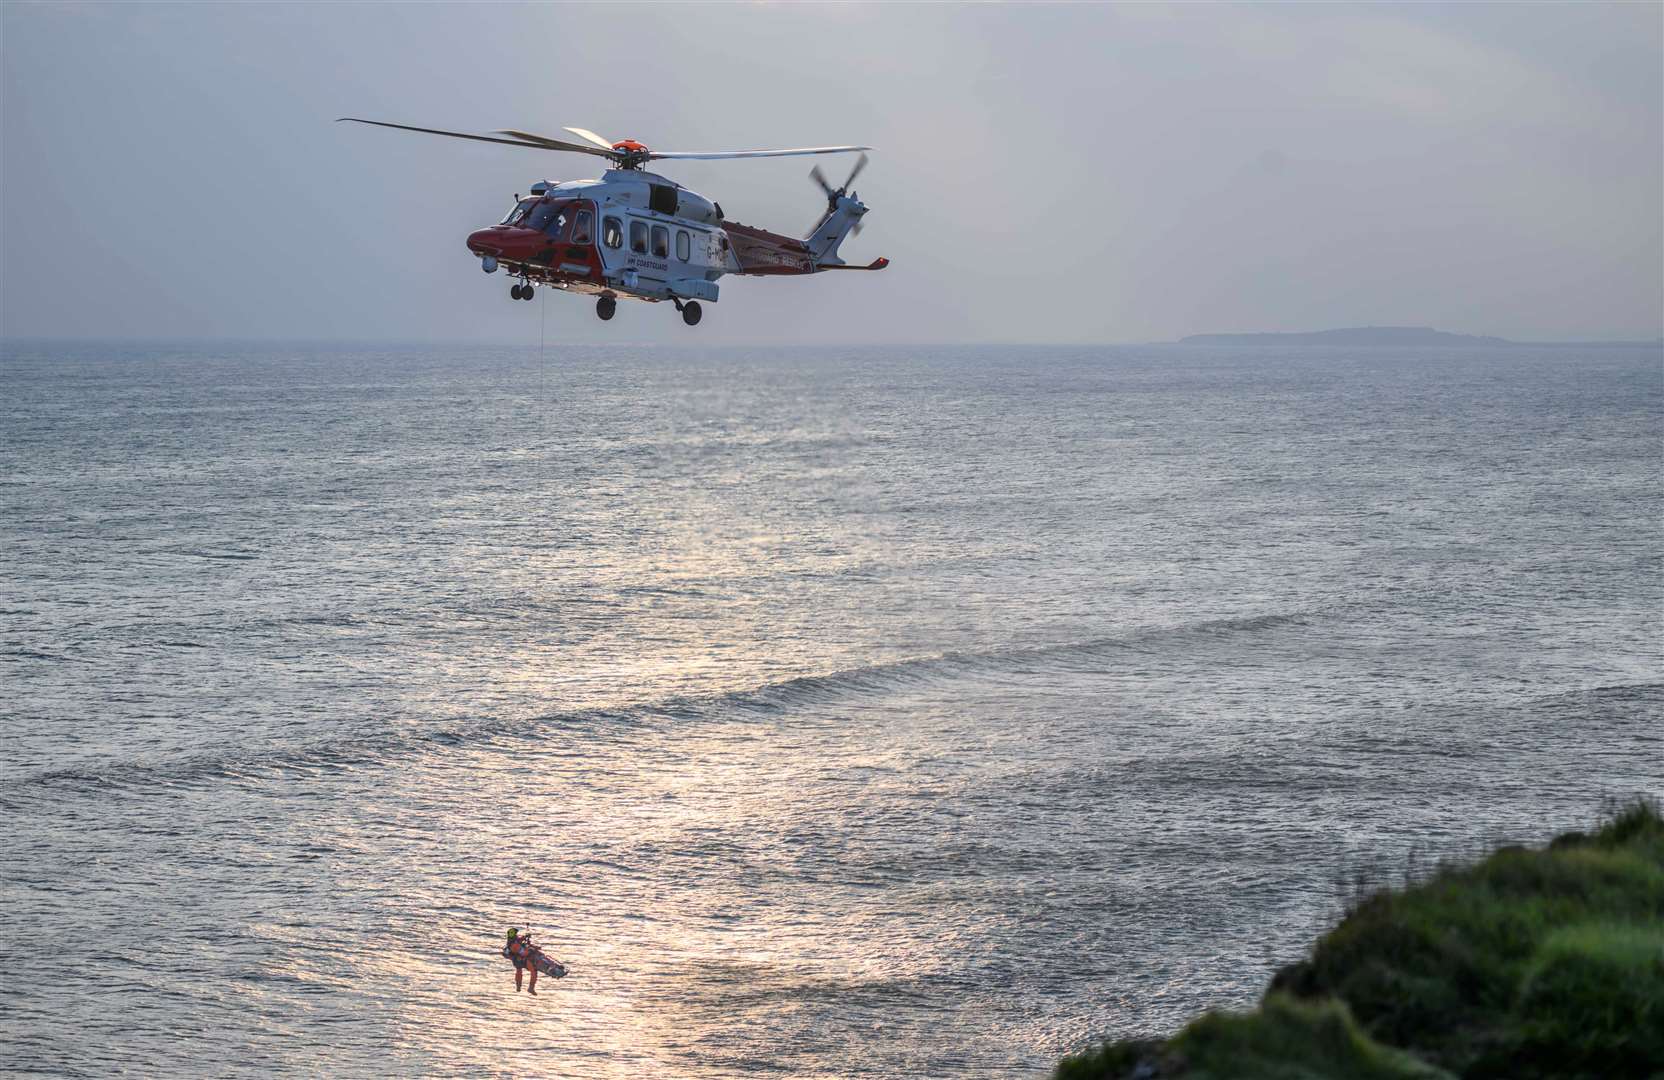 The coastguard helicopter is involved in the rescue. Picture: Jason Ludlow